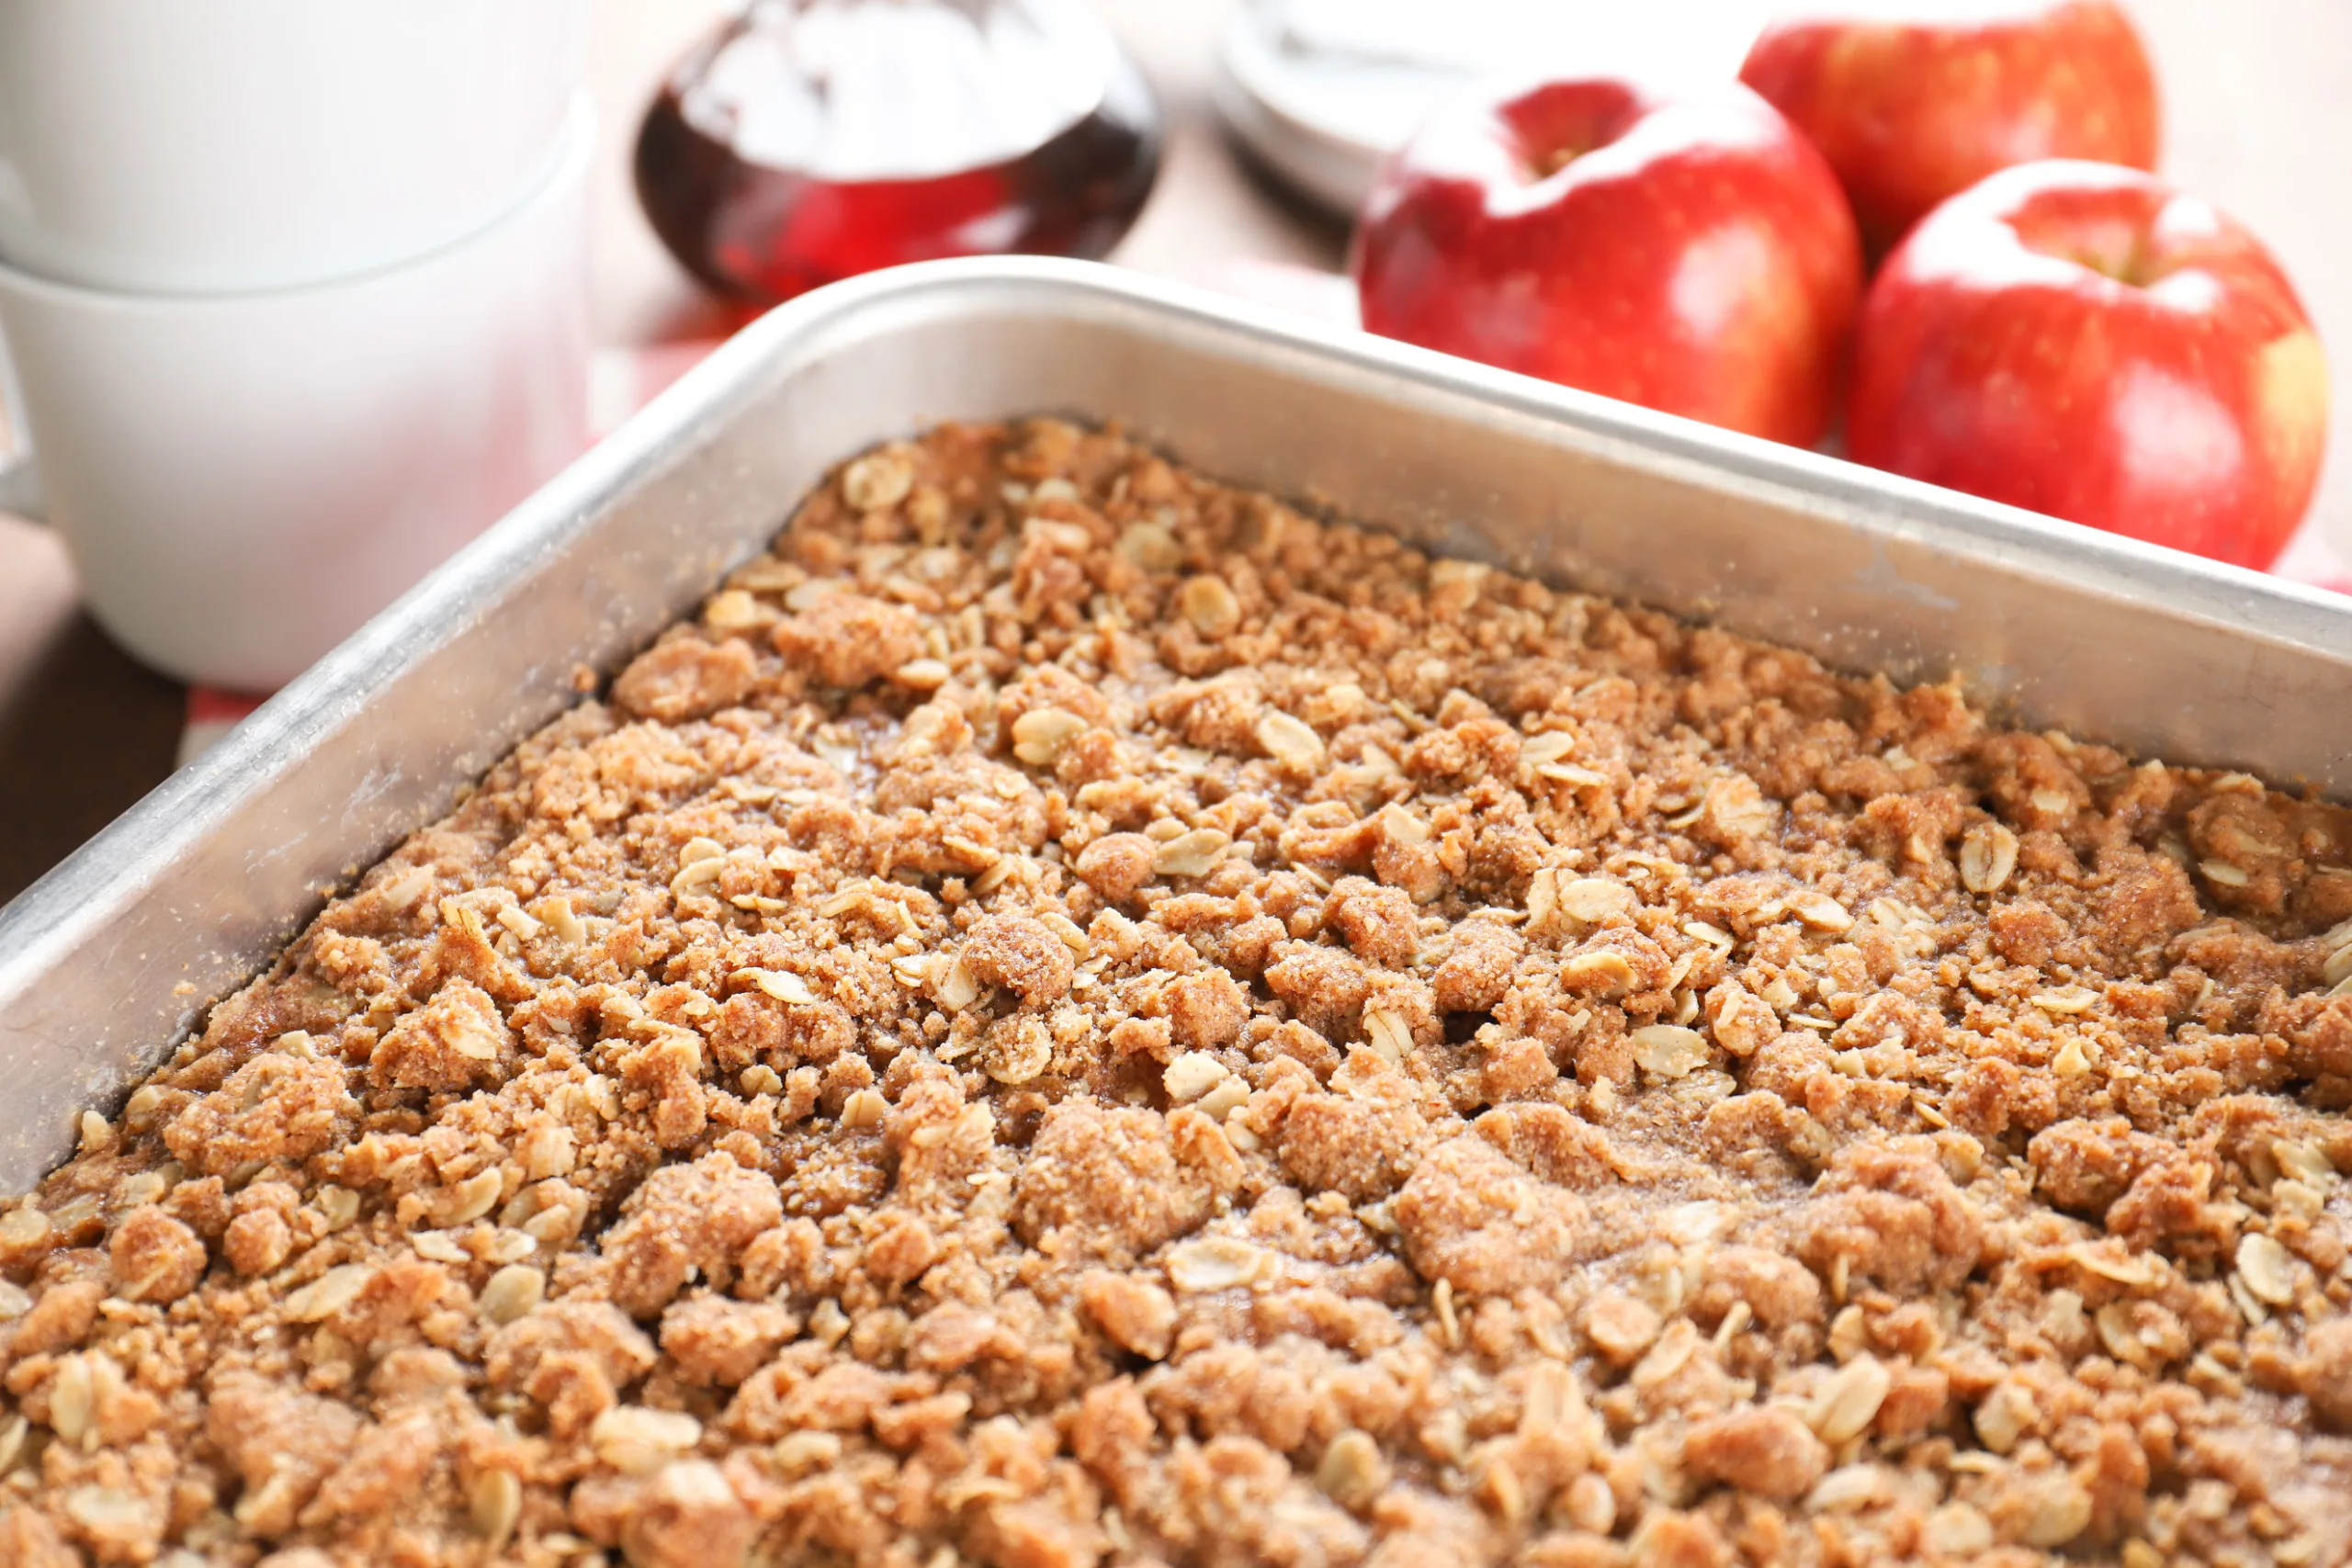 Up close view of the streusel topping on the apple baked oatmeal.